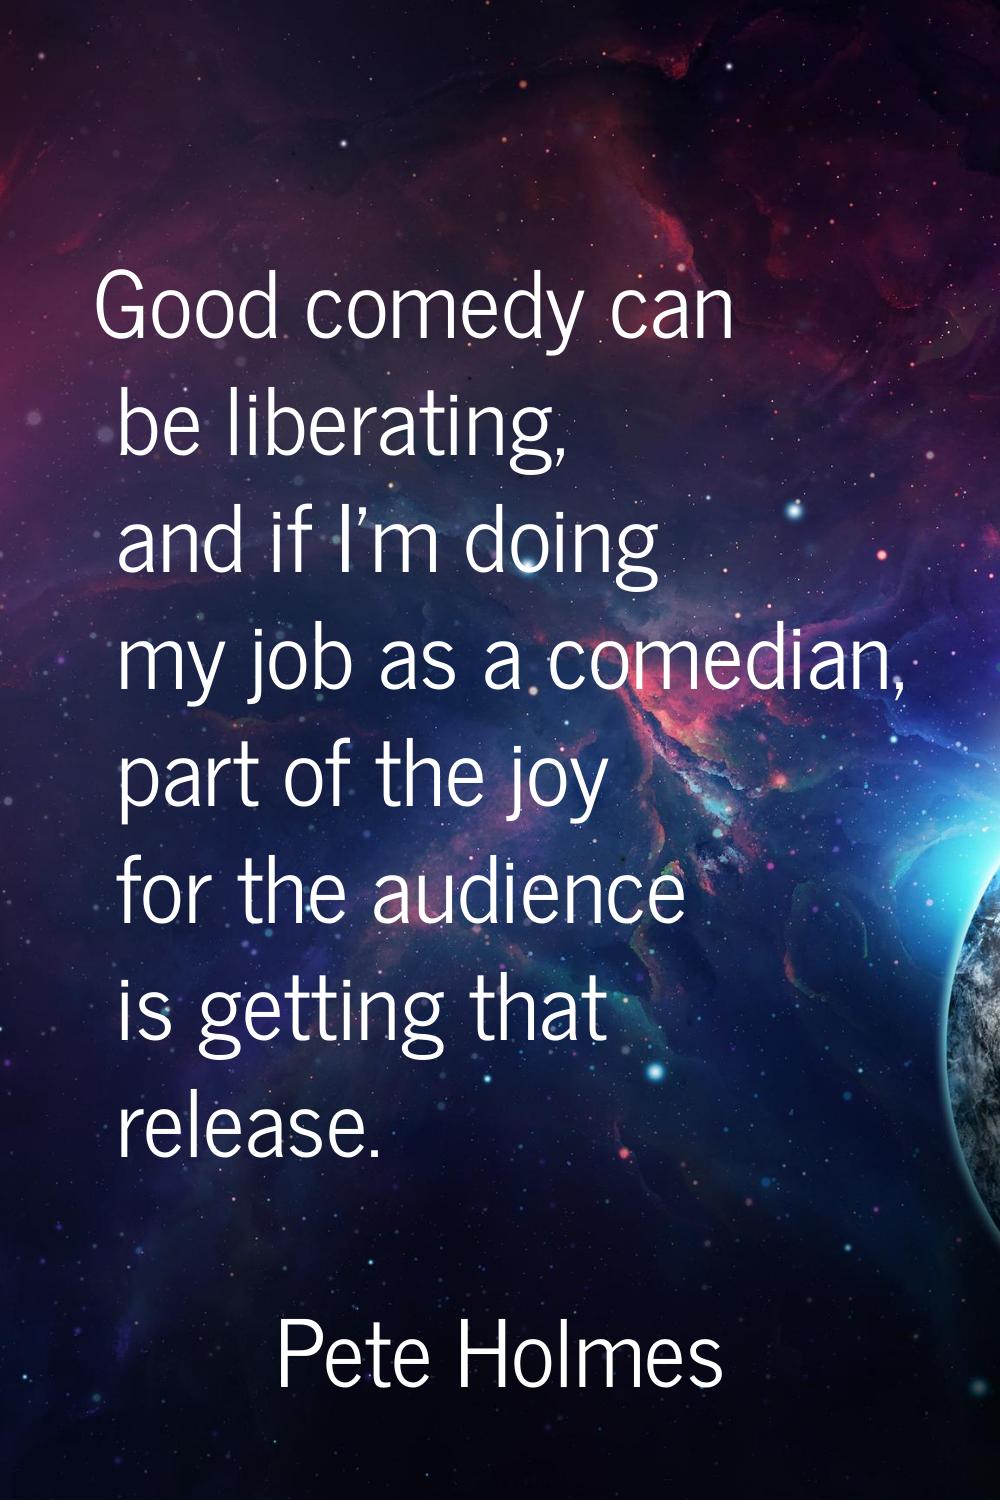 Good comedy can be liberating, and if I'm doing my job as a comedian, part of the joy for the audie